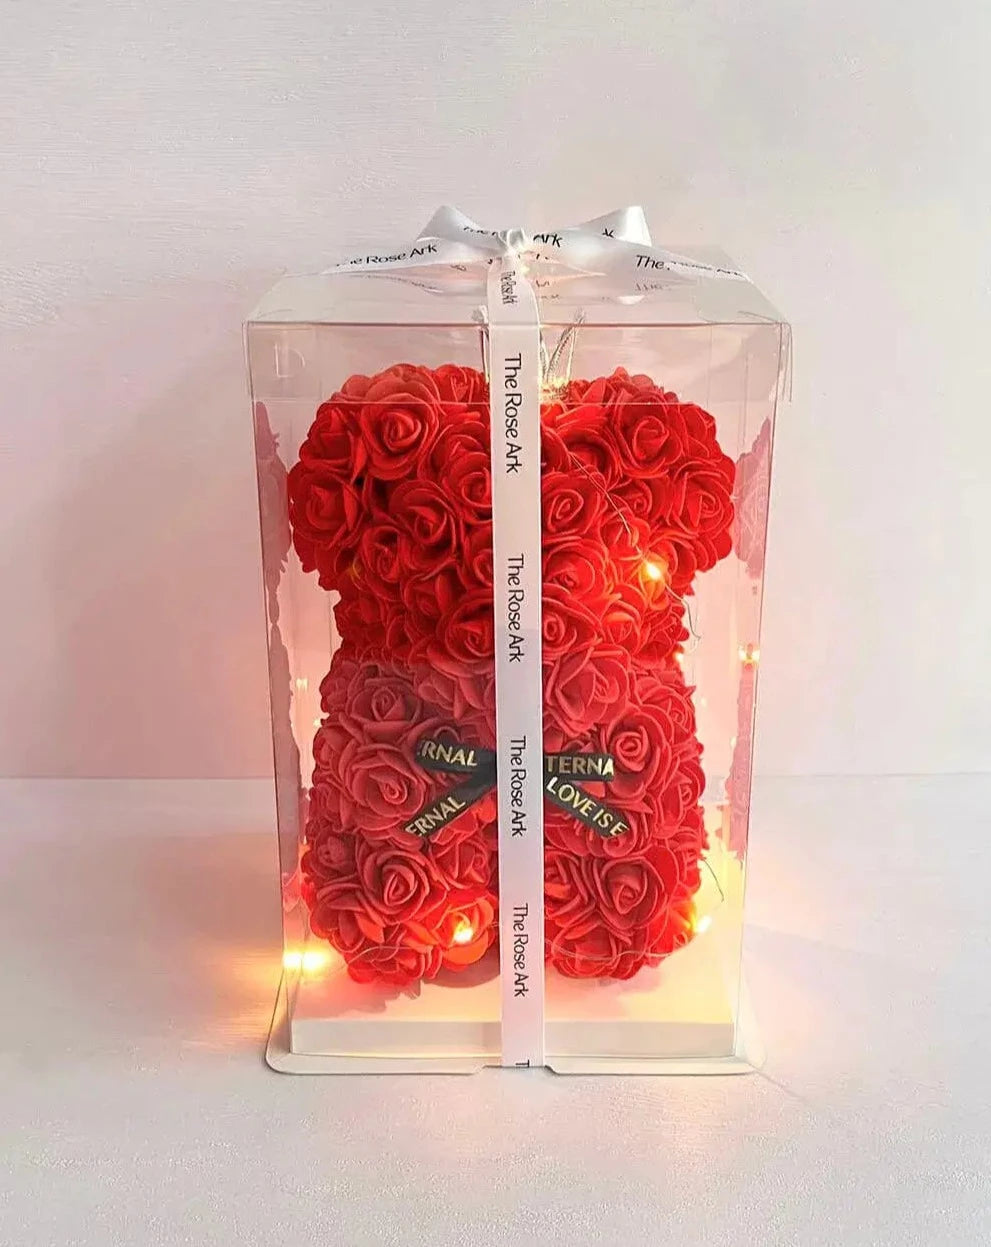 25cm Red Rose Bear with Fairy Lights in Box The Rose Ark